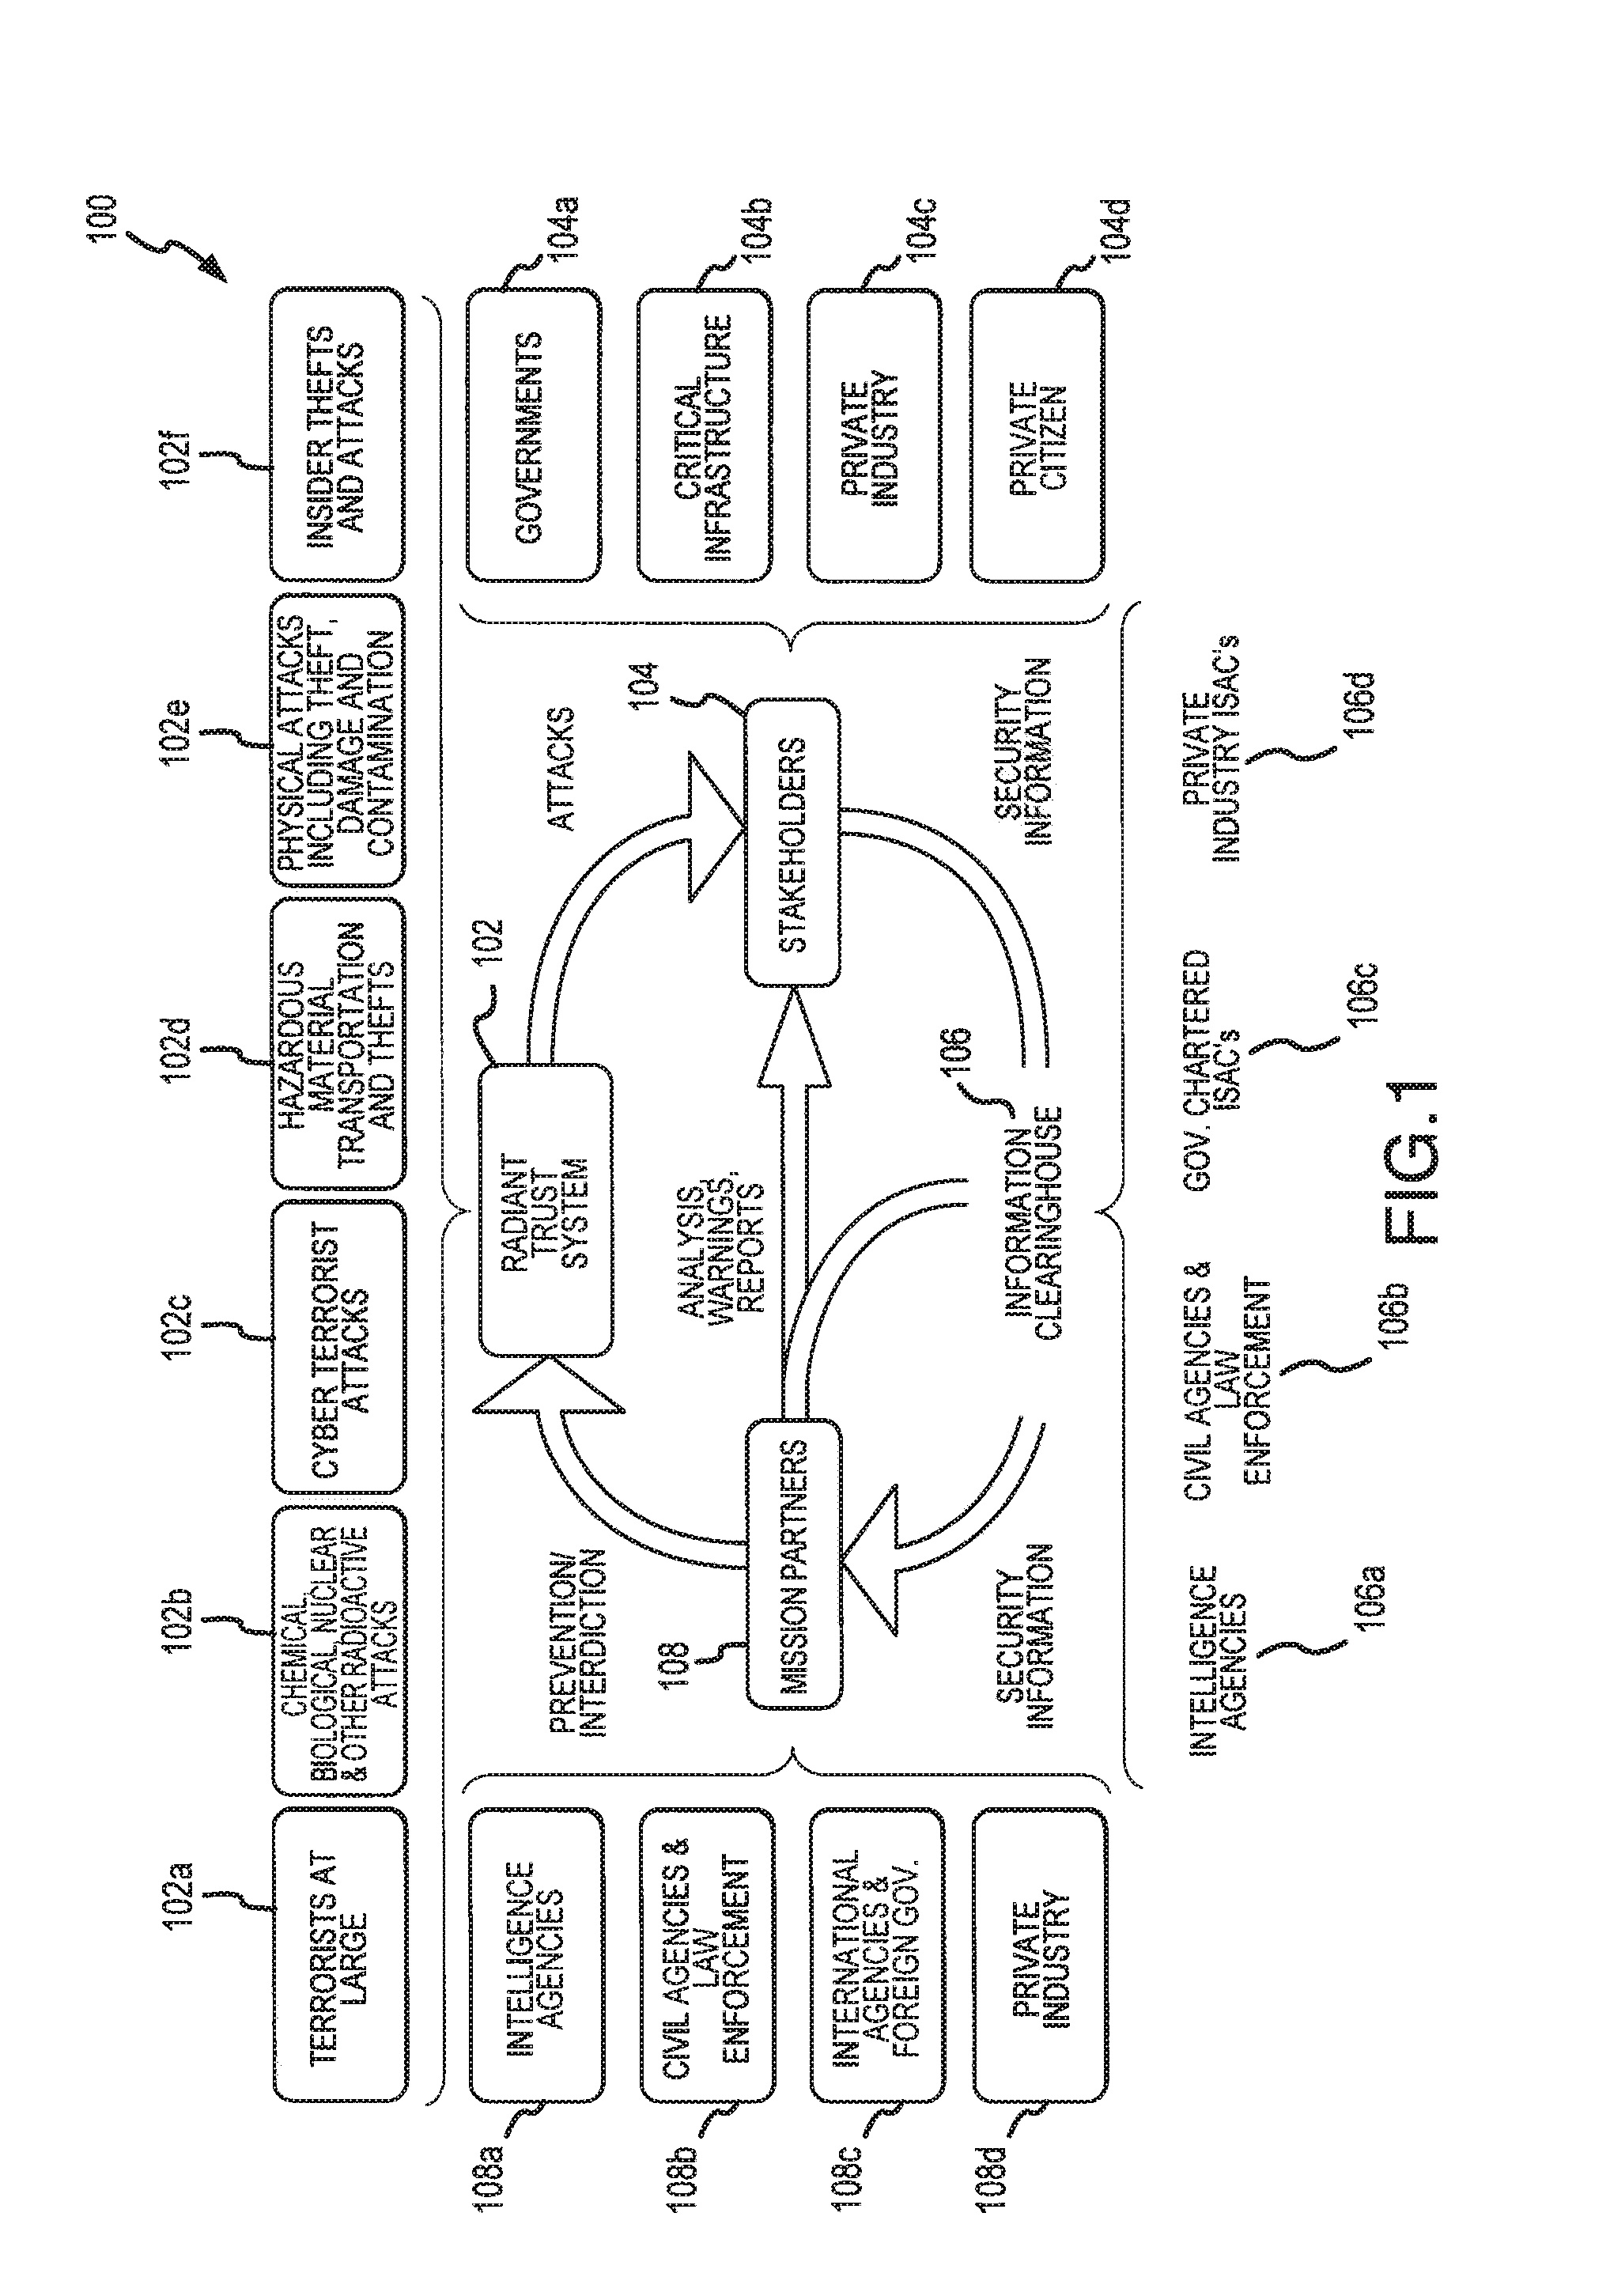 System for enabling collaboration and protecting sensitive data